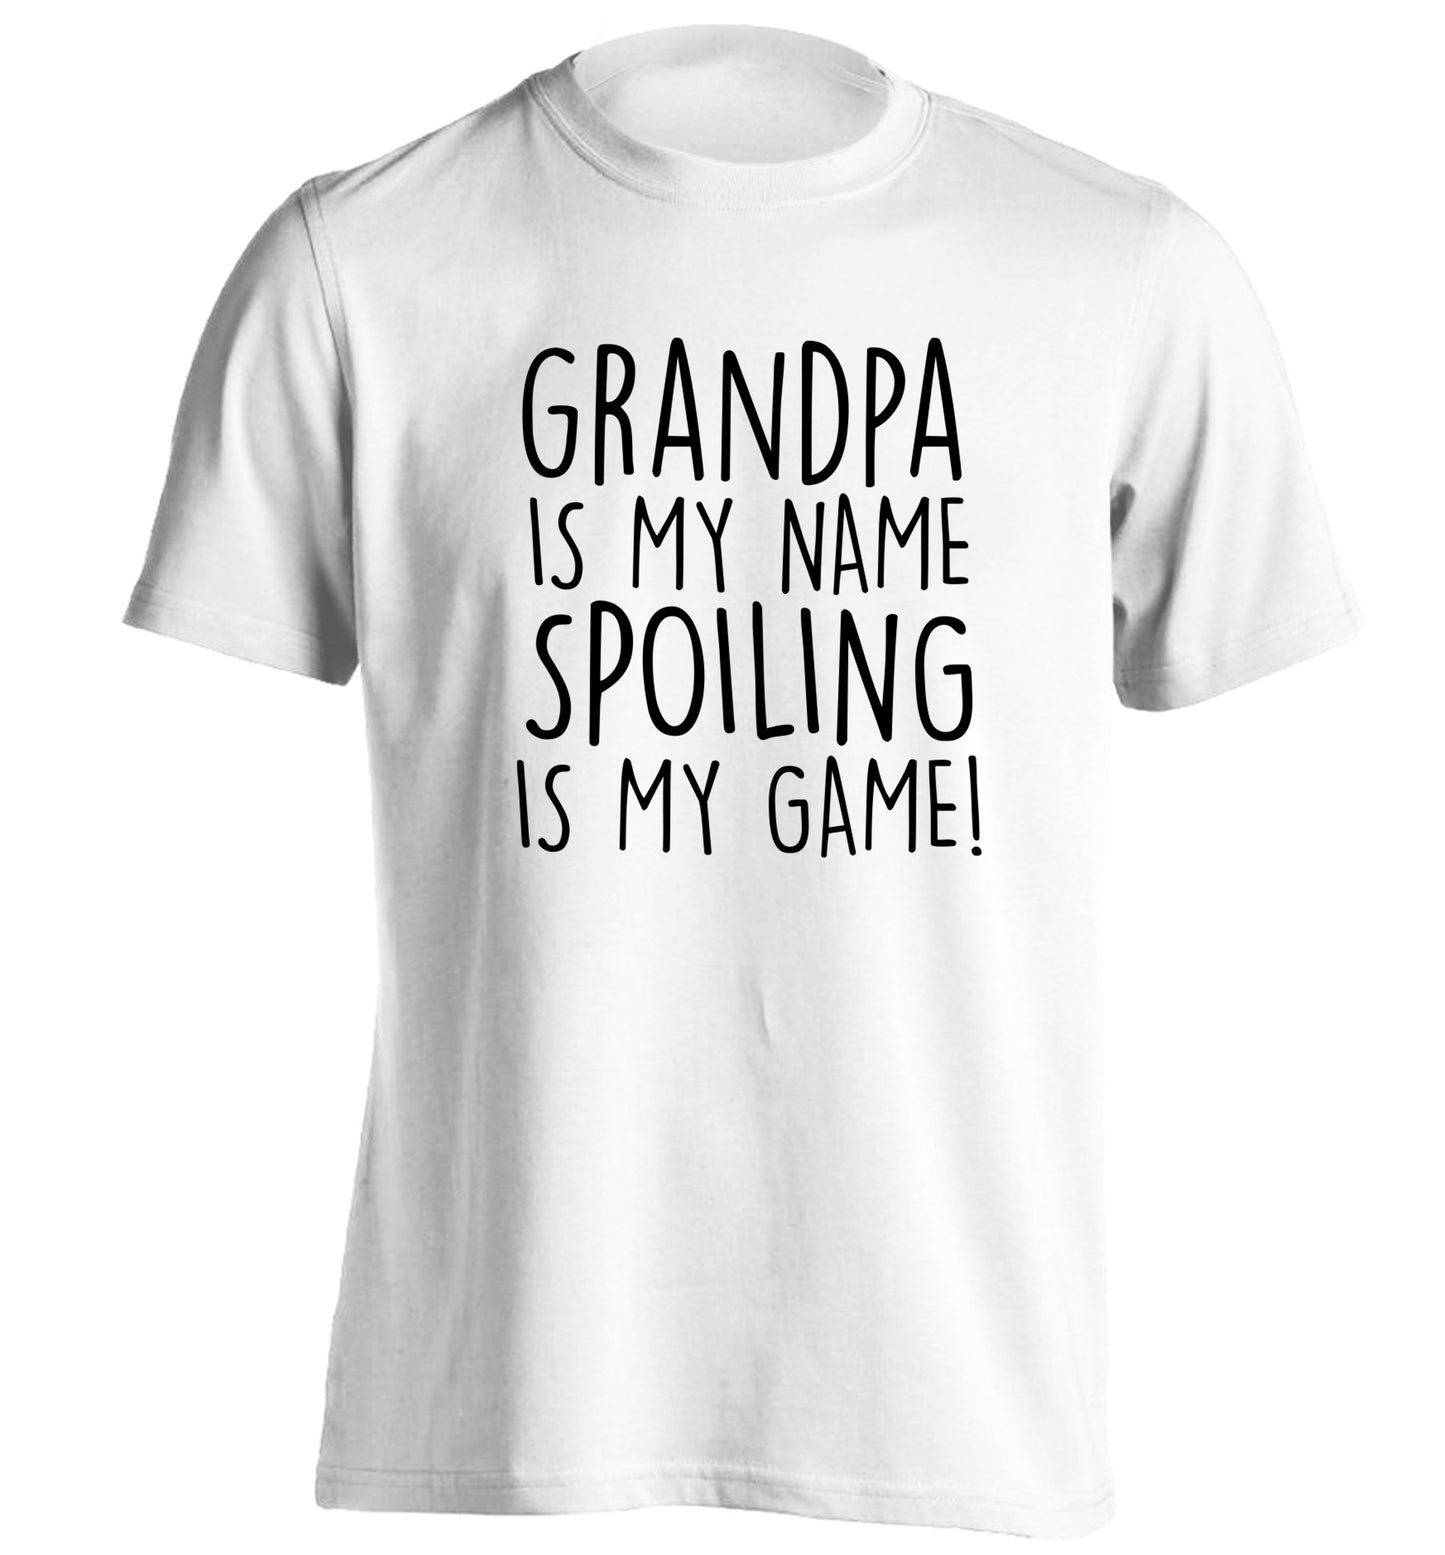 Grandpa is my name, spoiling is my game adults unisex white Tshirt 2XL